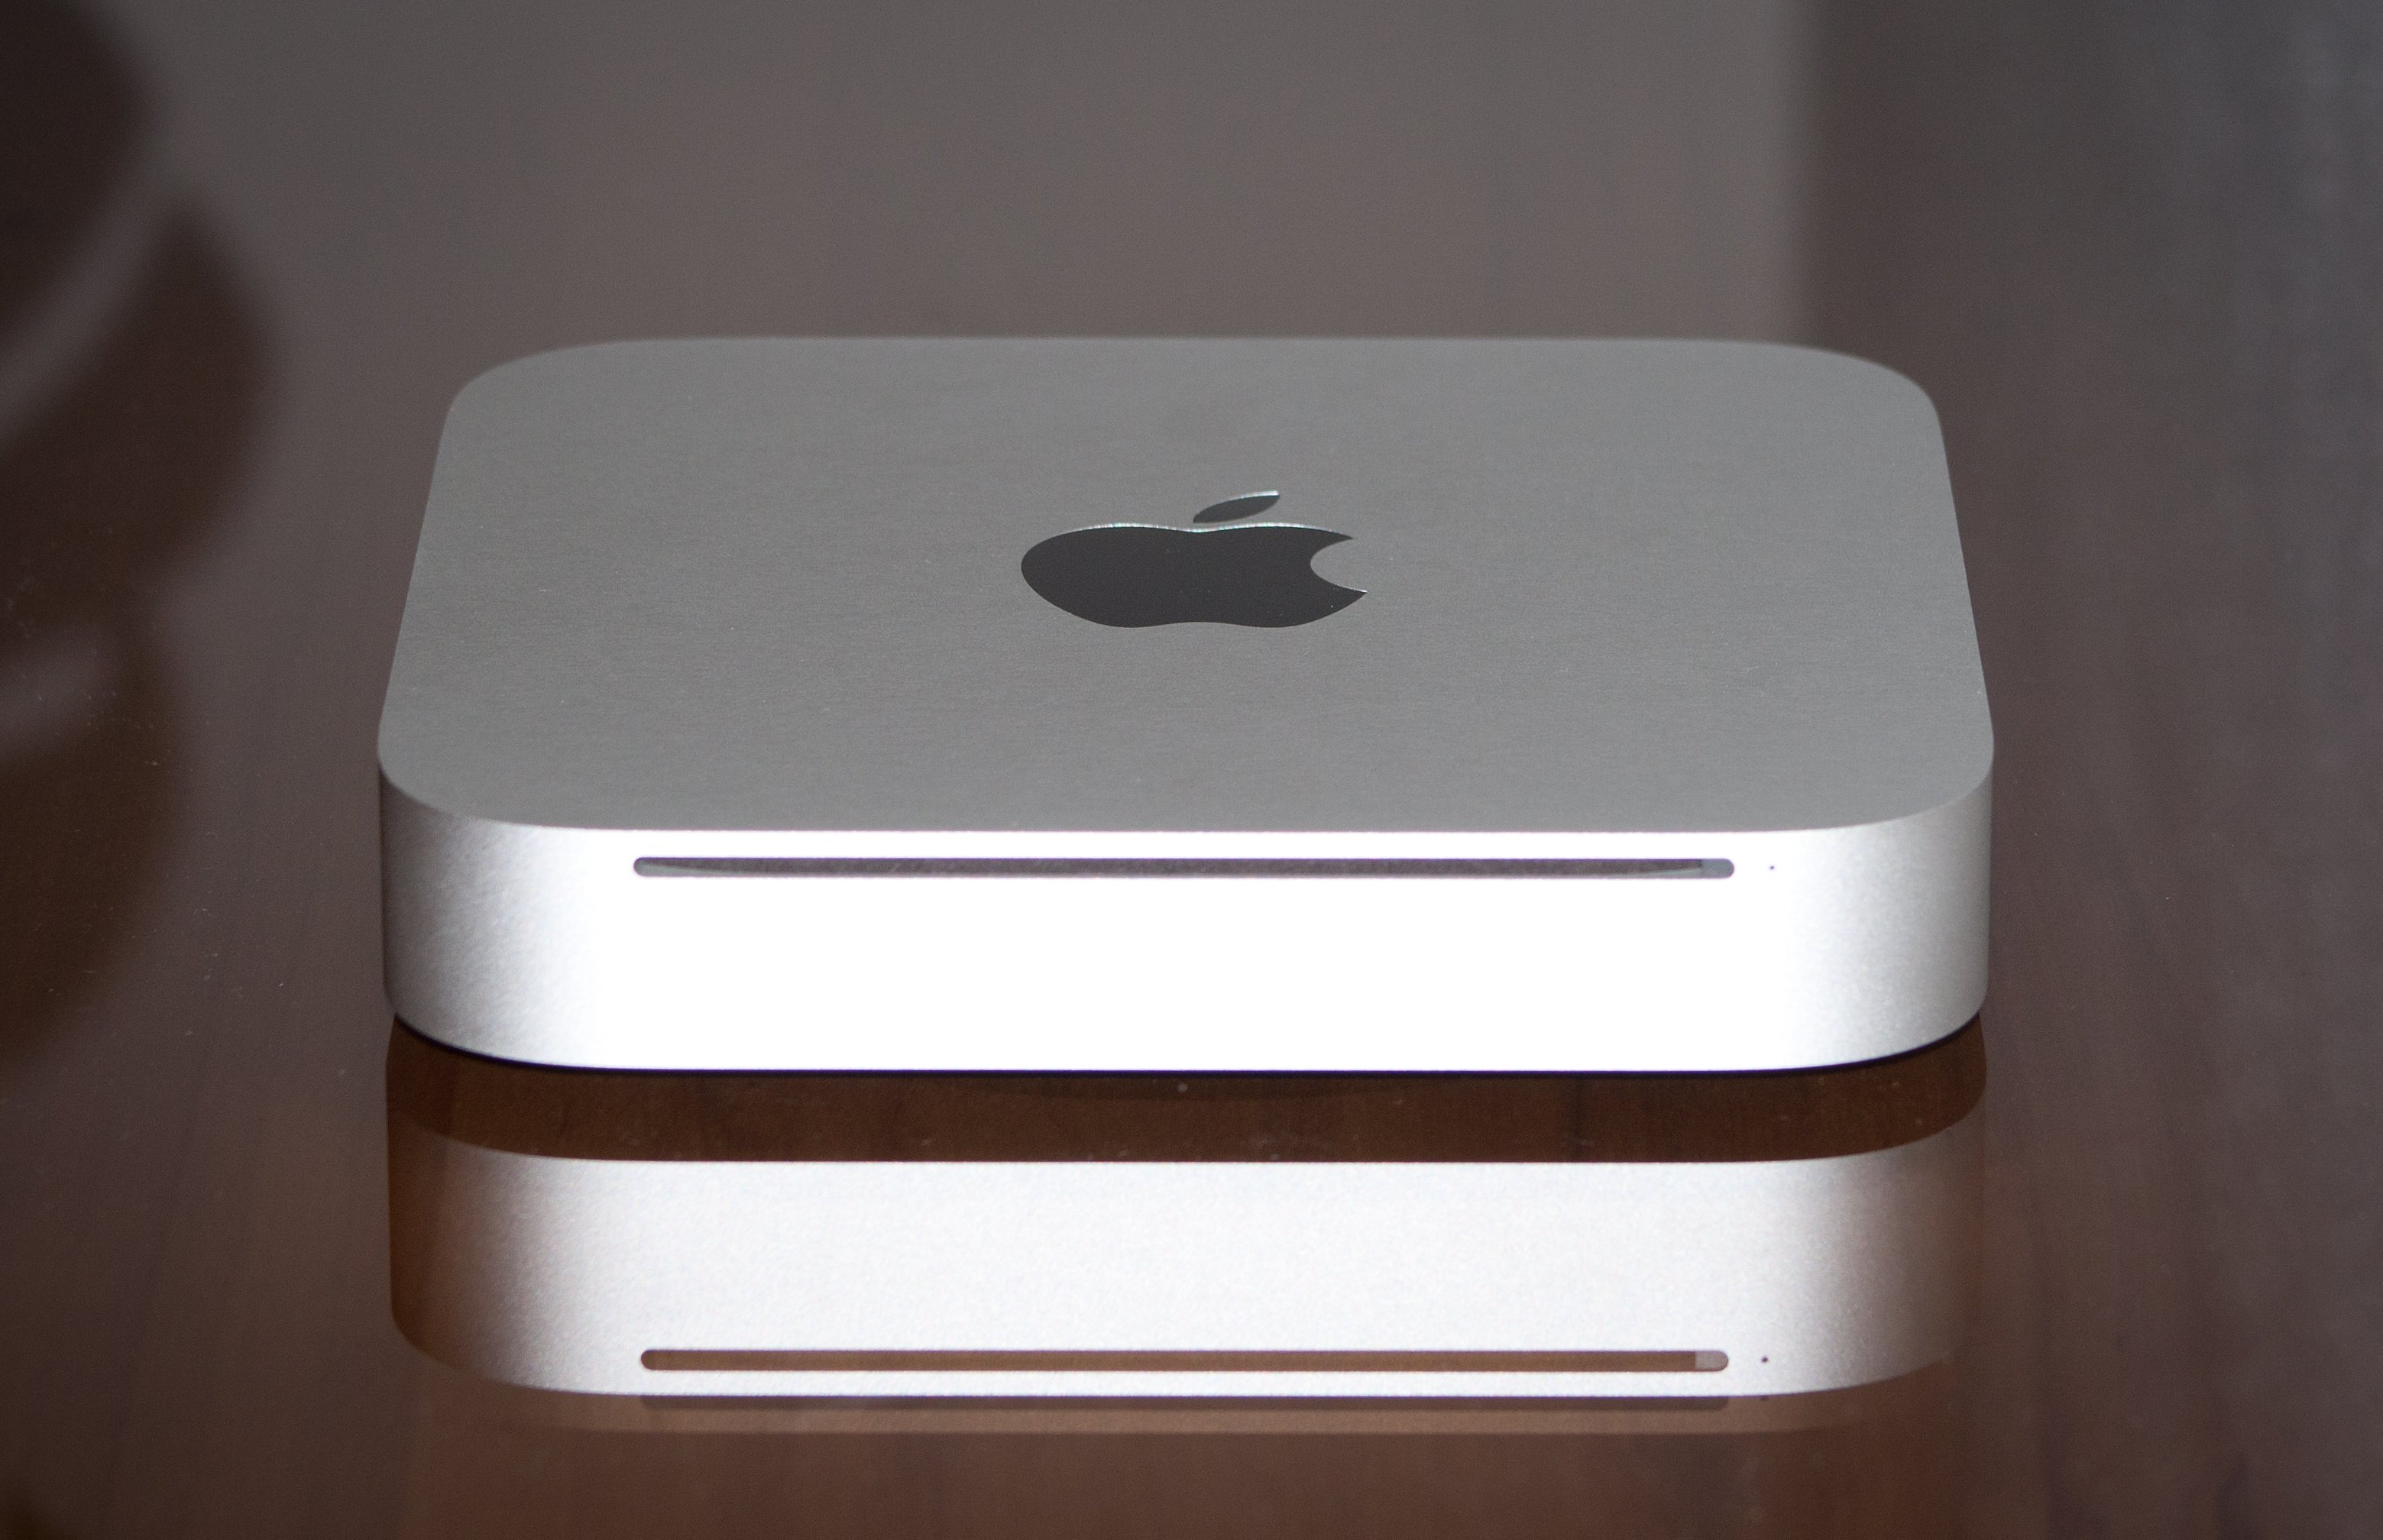 Is a mac mini good for gaming